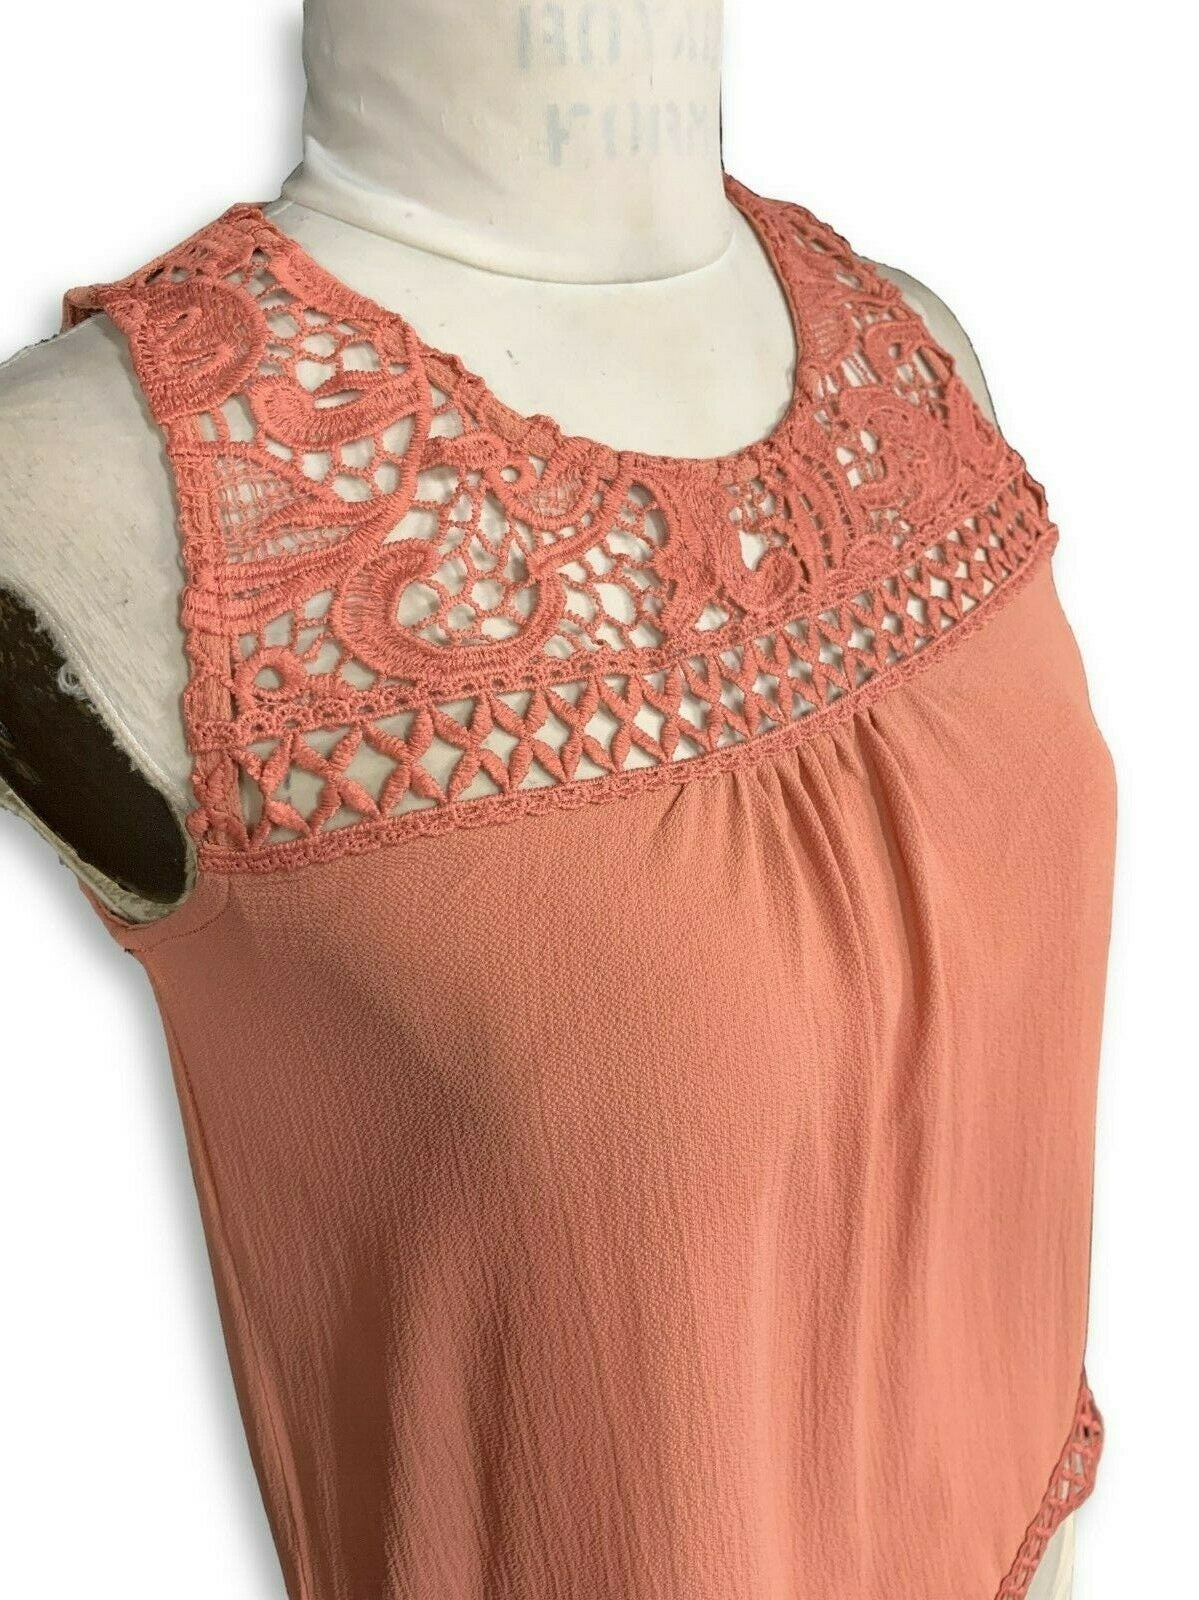 Womens Apricot Tank with Matching Crochet Trim Sizes S-XL | Etsy